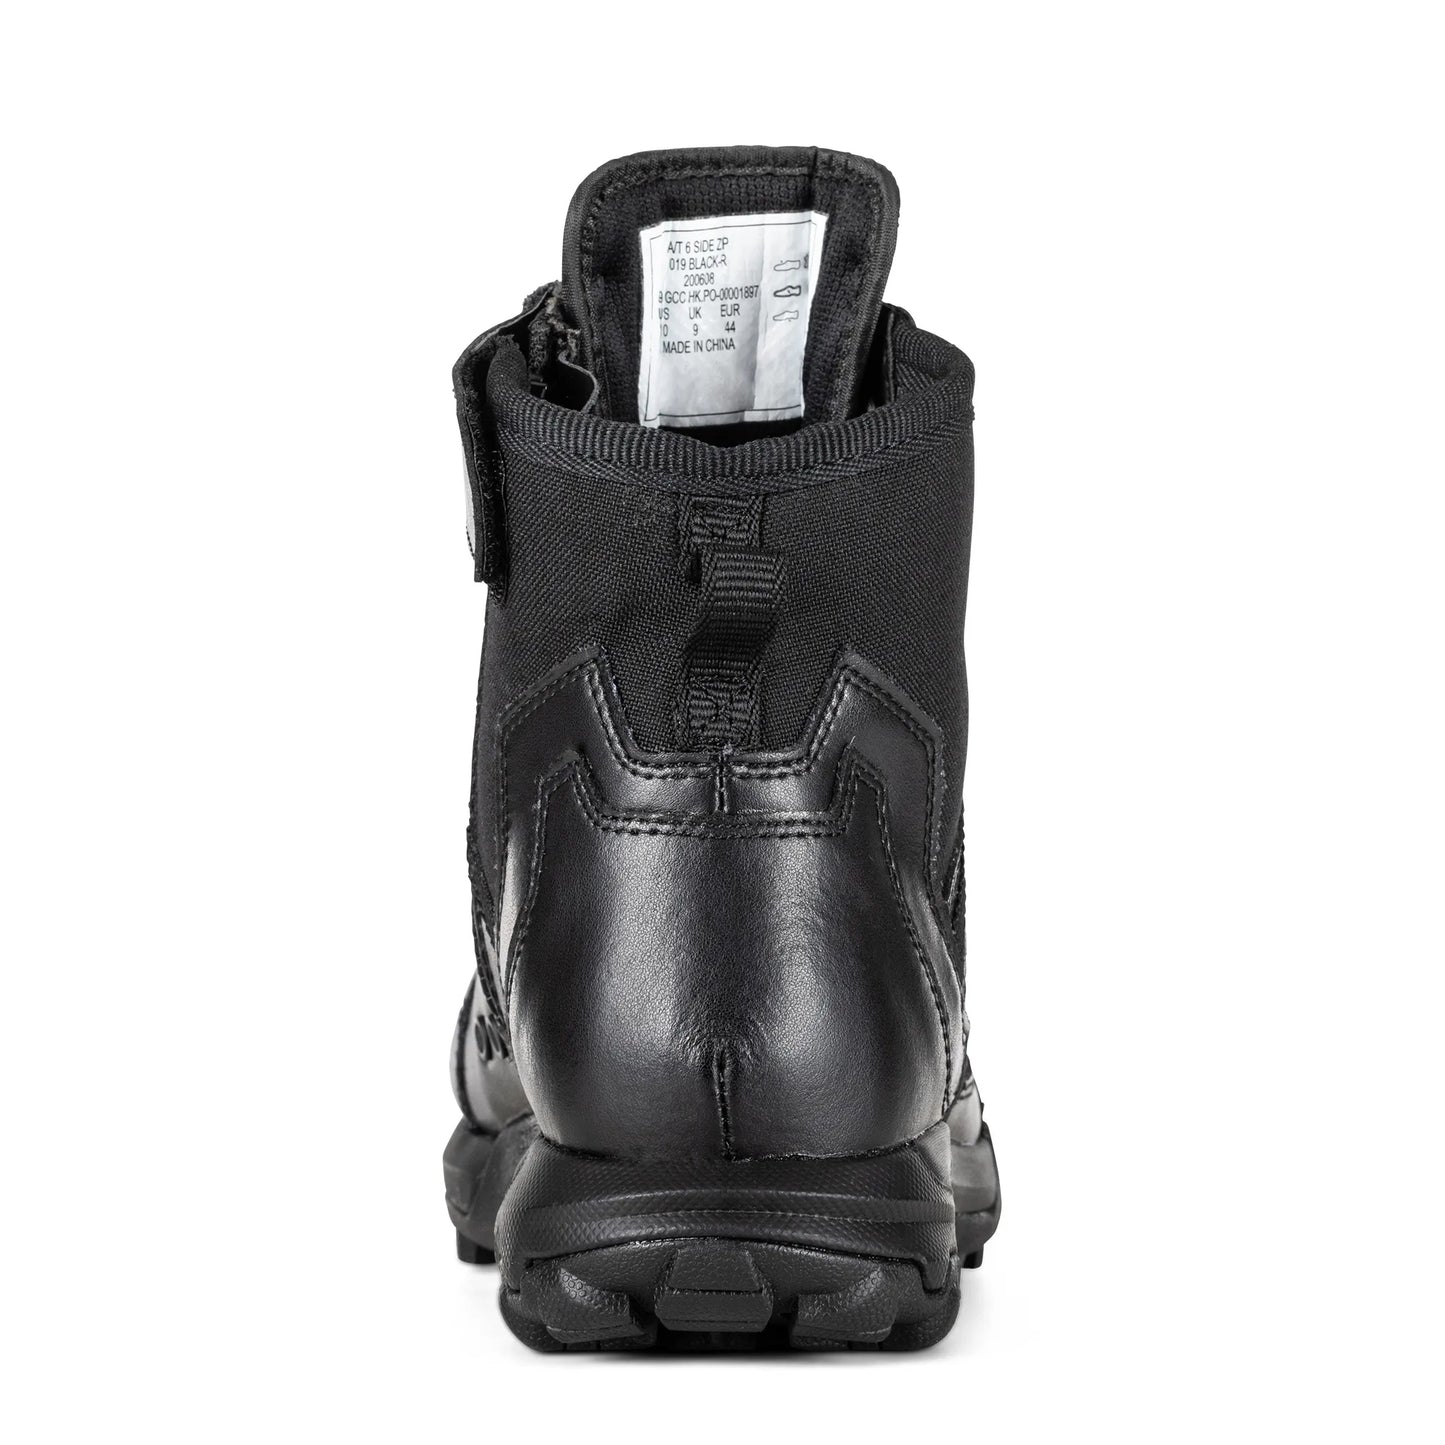 5.11 A/T 6" Side Zip Boot